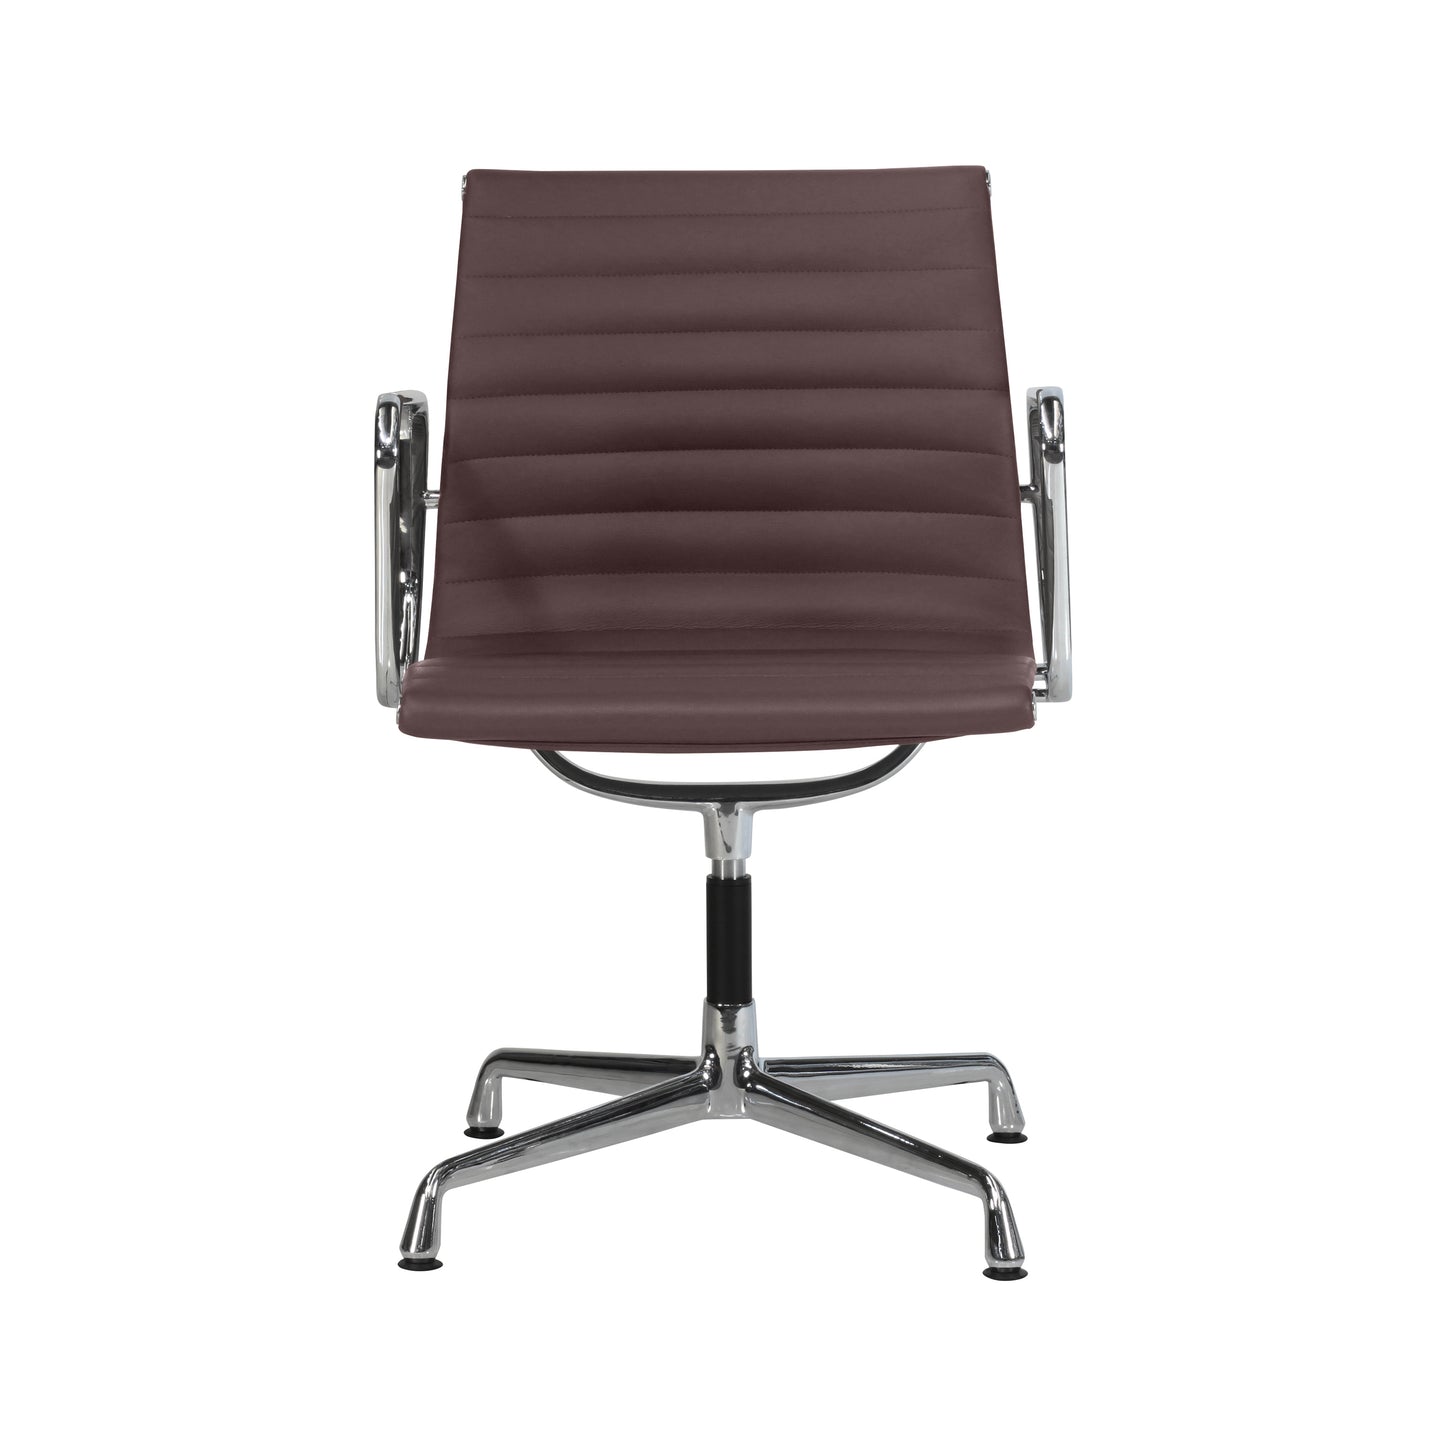 Chair without wheels aluminium style | Chocolate Leather | Front